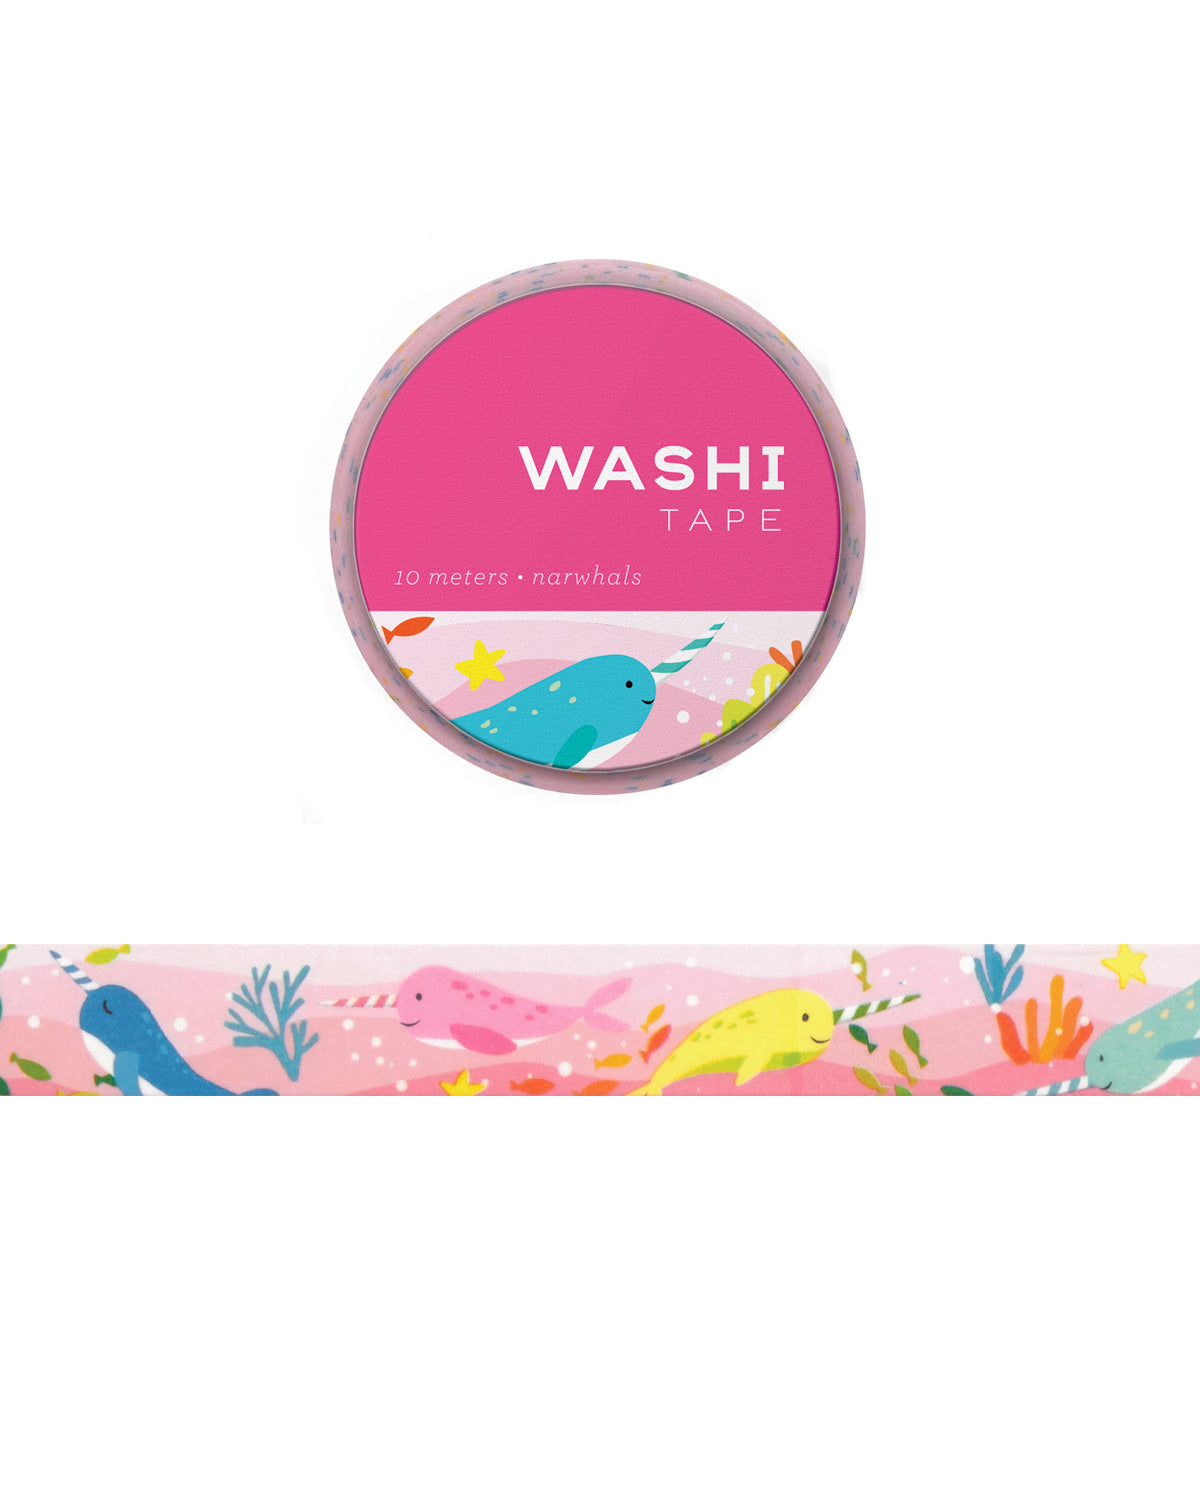 Narwhals Washi Tape | Girl of All Work Girl of All Work - Oscar & Libby's